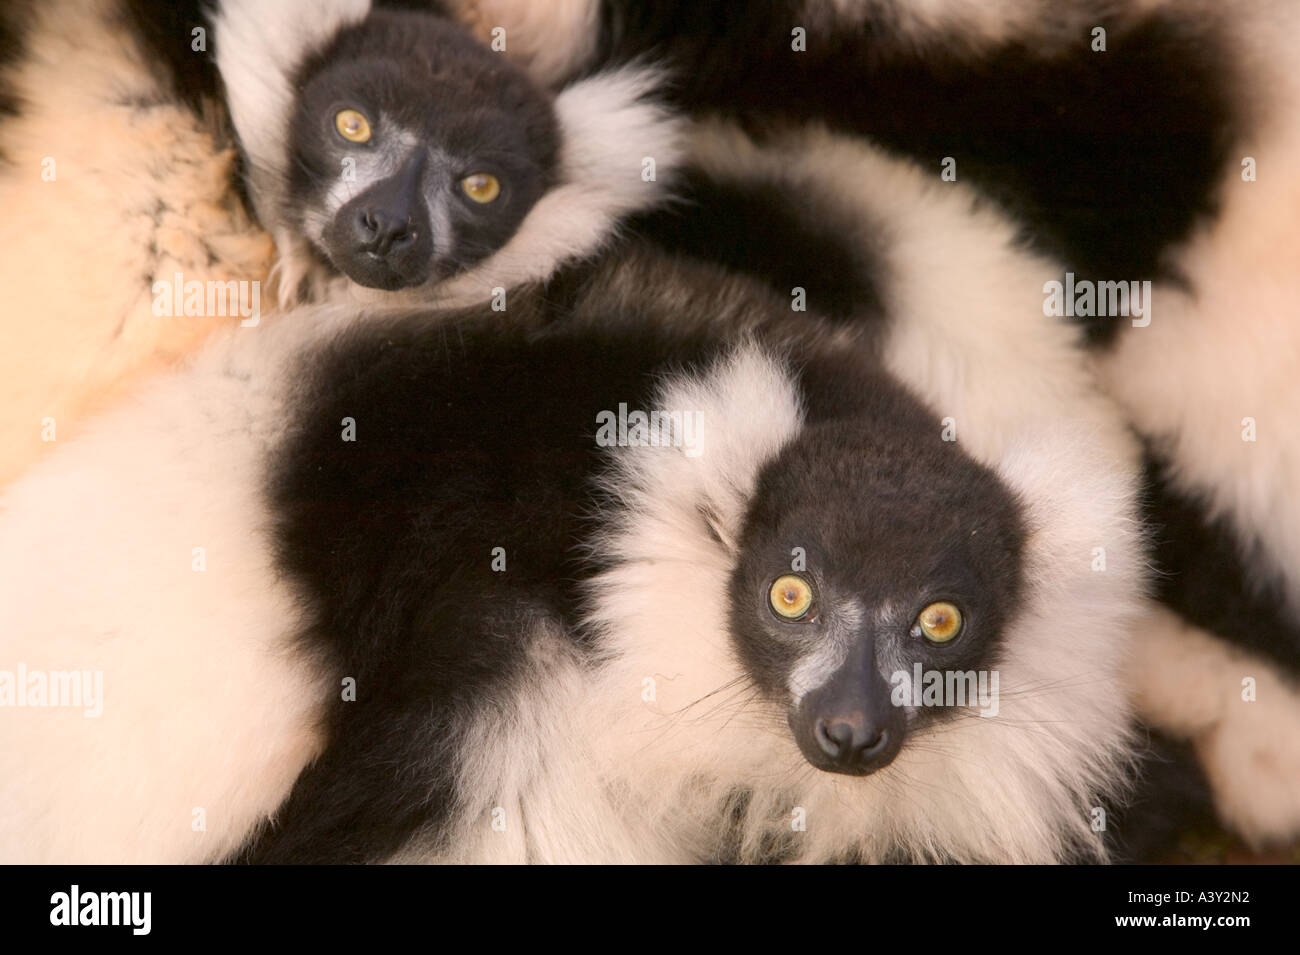 a family group of Black and White Ruffed Lemurs huddling together for warmth Stock Photo